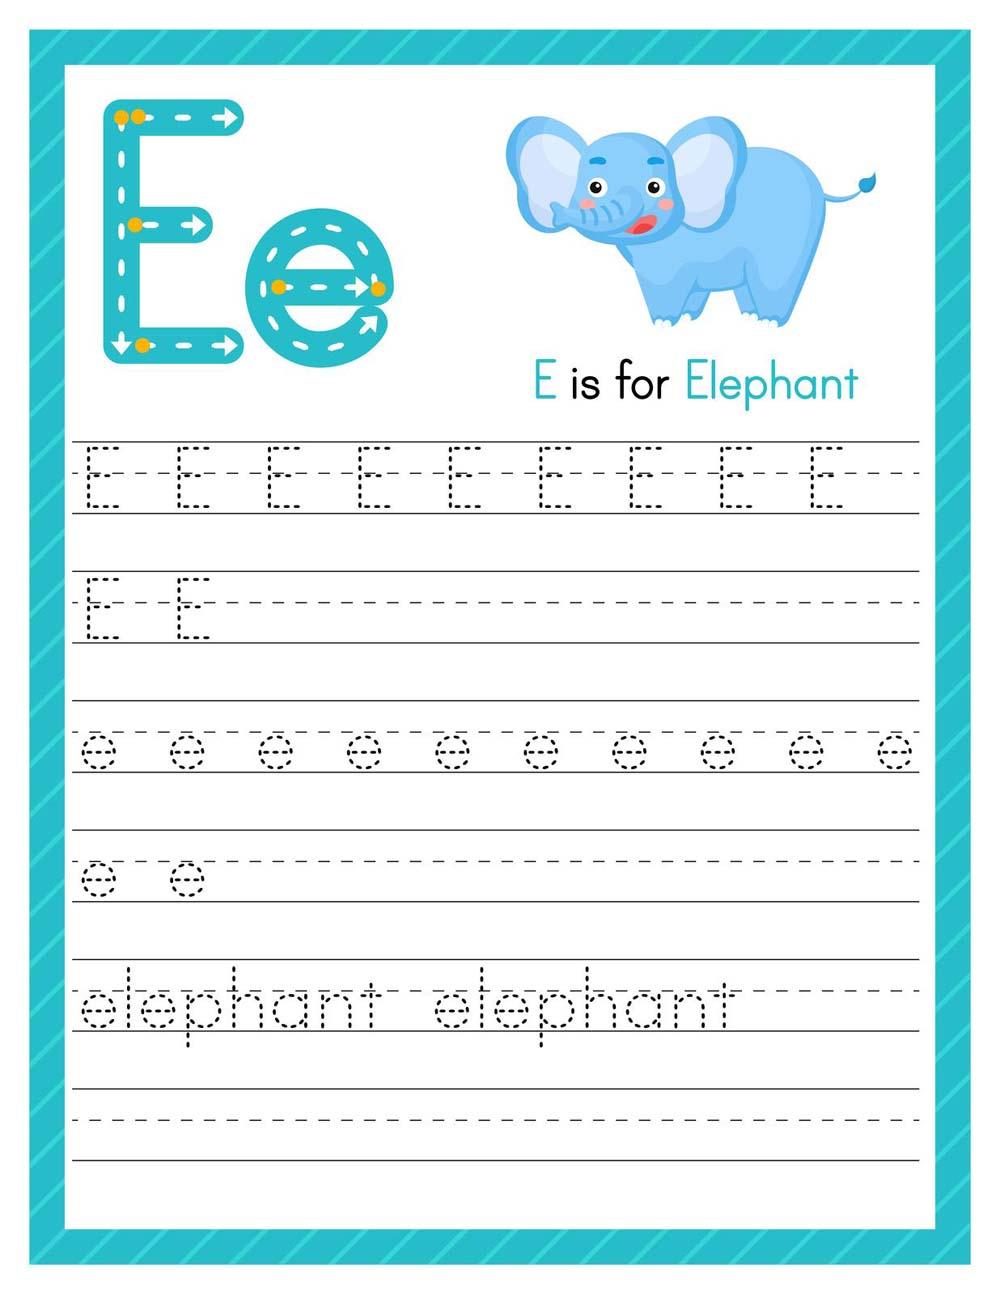 Picture Worksheet 3 E e elephant - Tracing Practice of Capital E and Small e